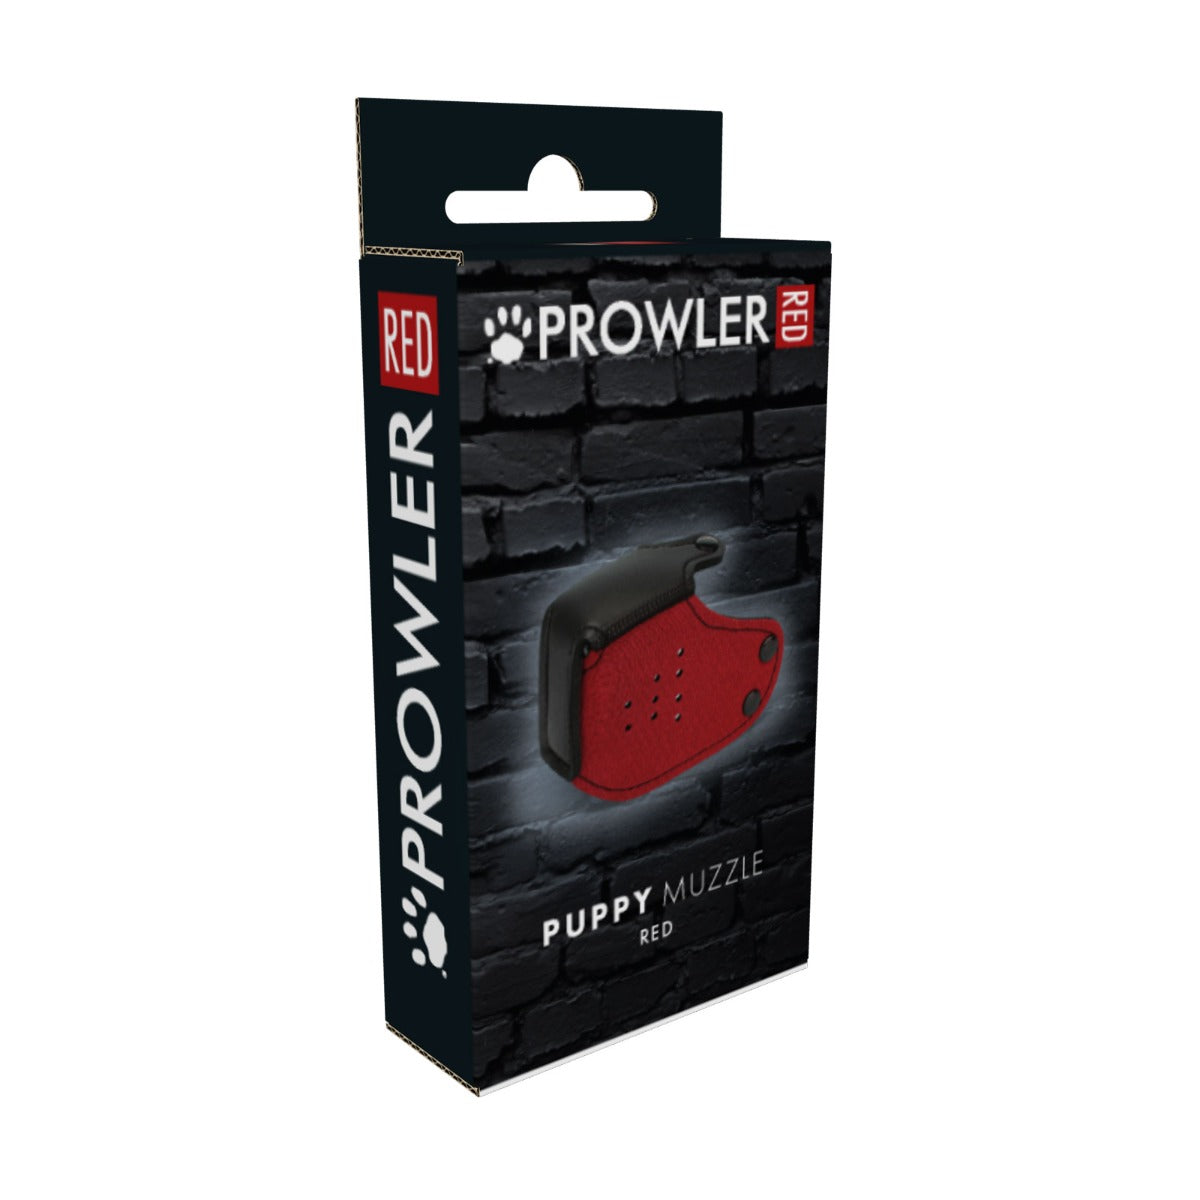 Prowler RED Puppy Muzzle Red